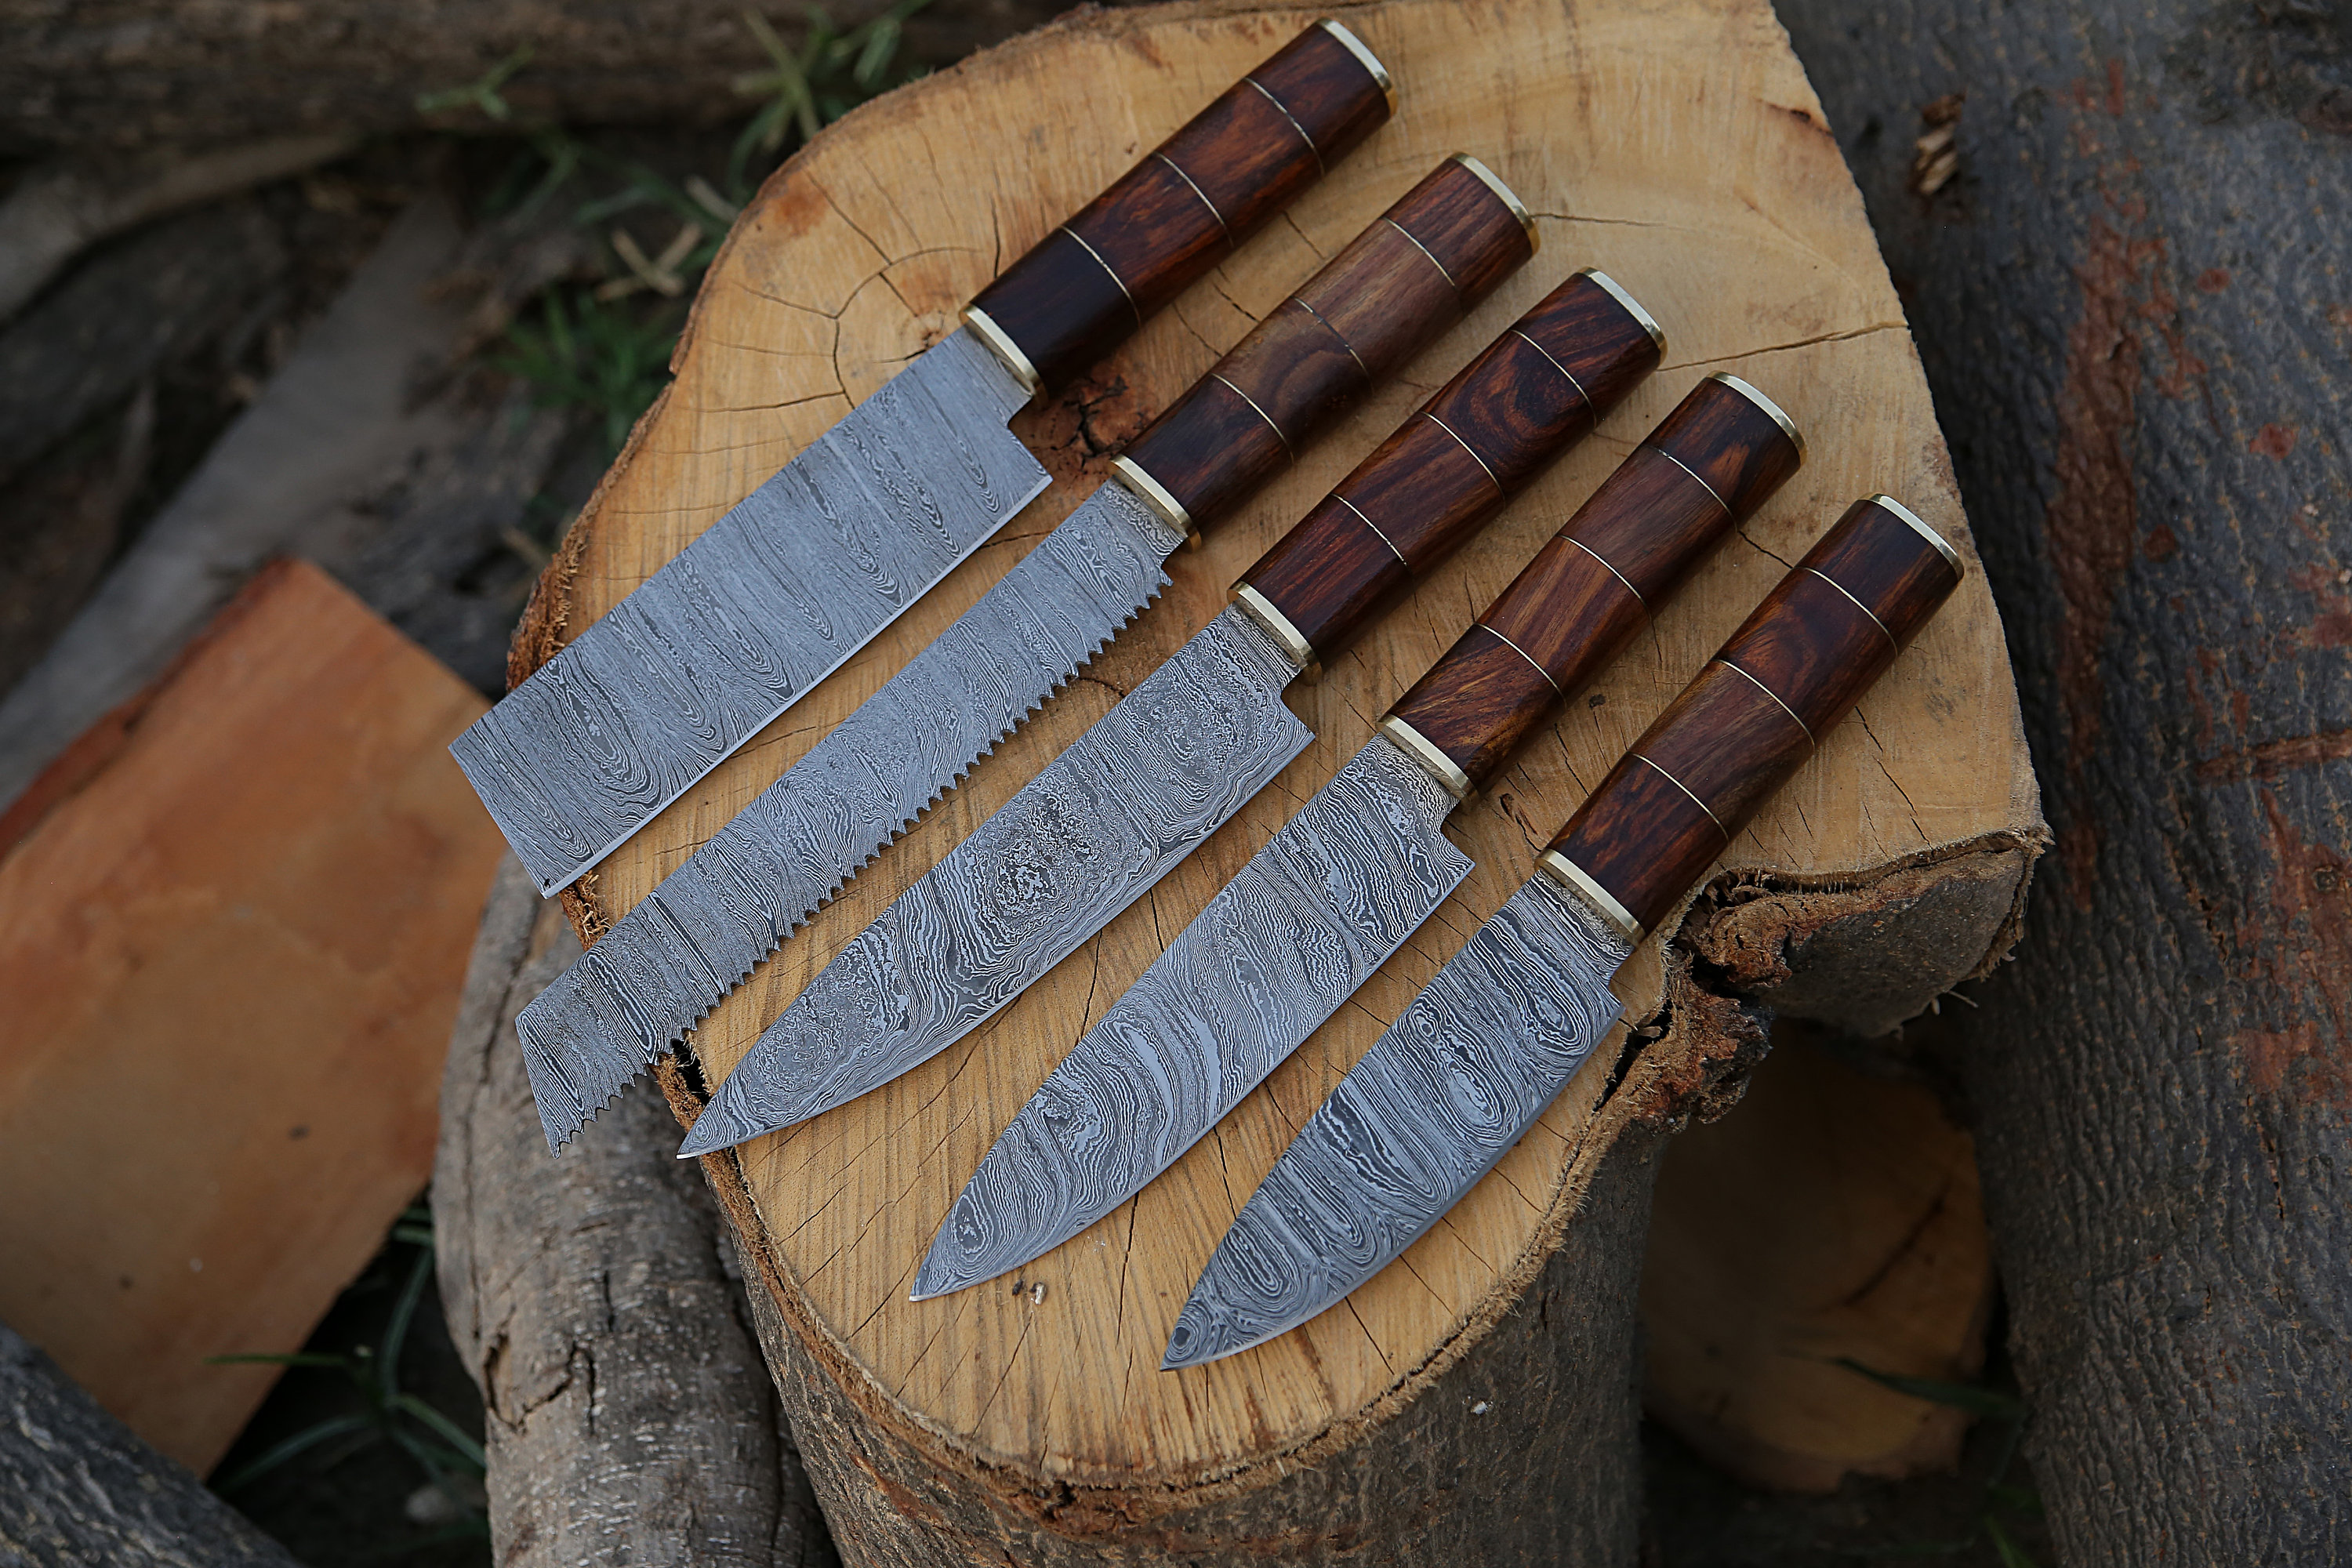 Damascus Chef Knives with Rosewood Handles – 5 Knife Set